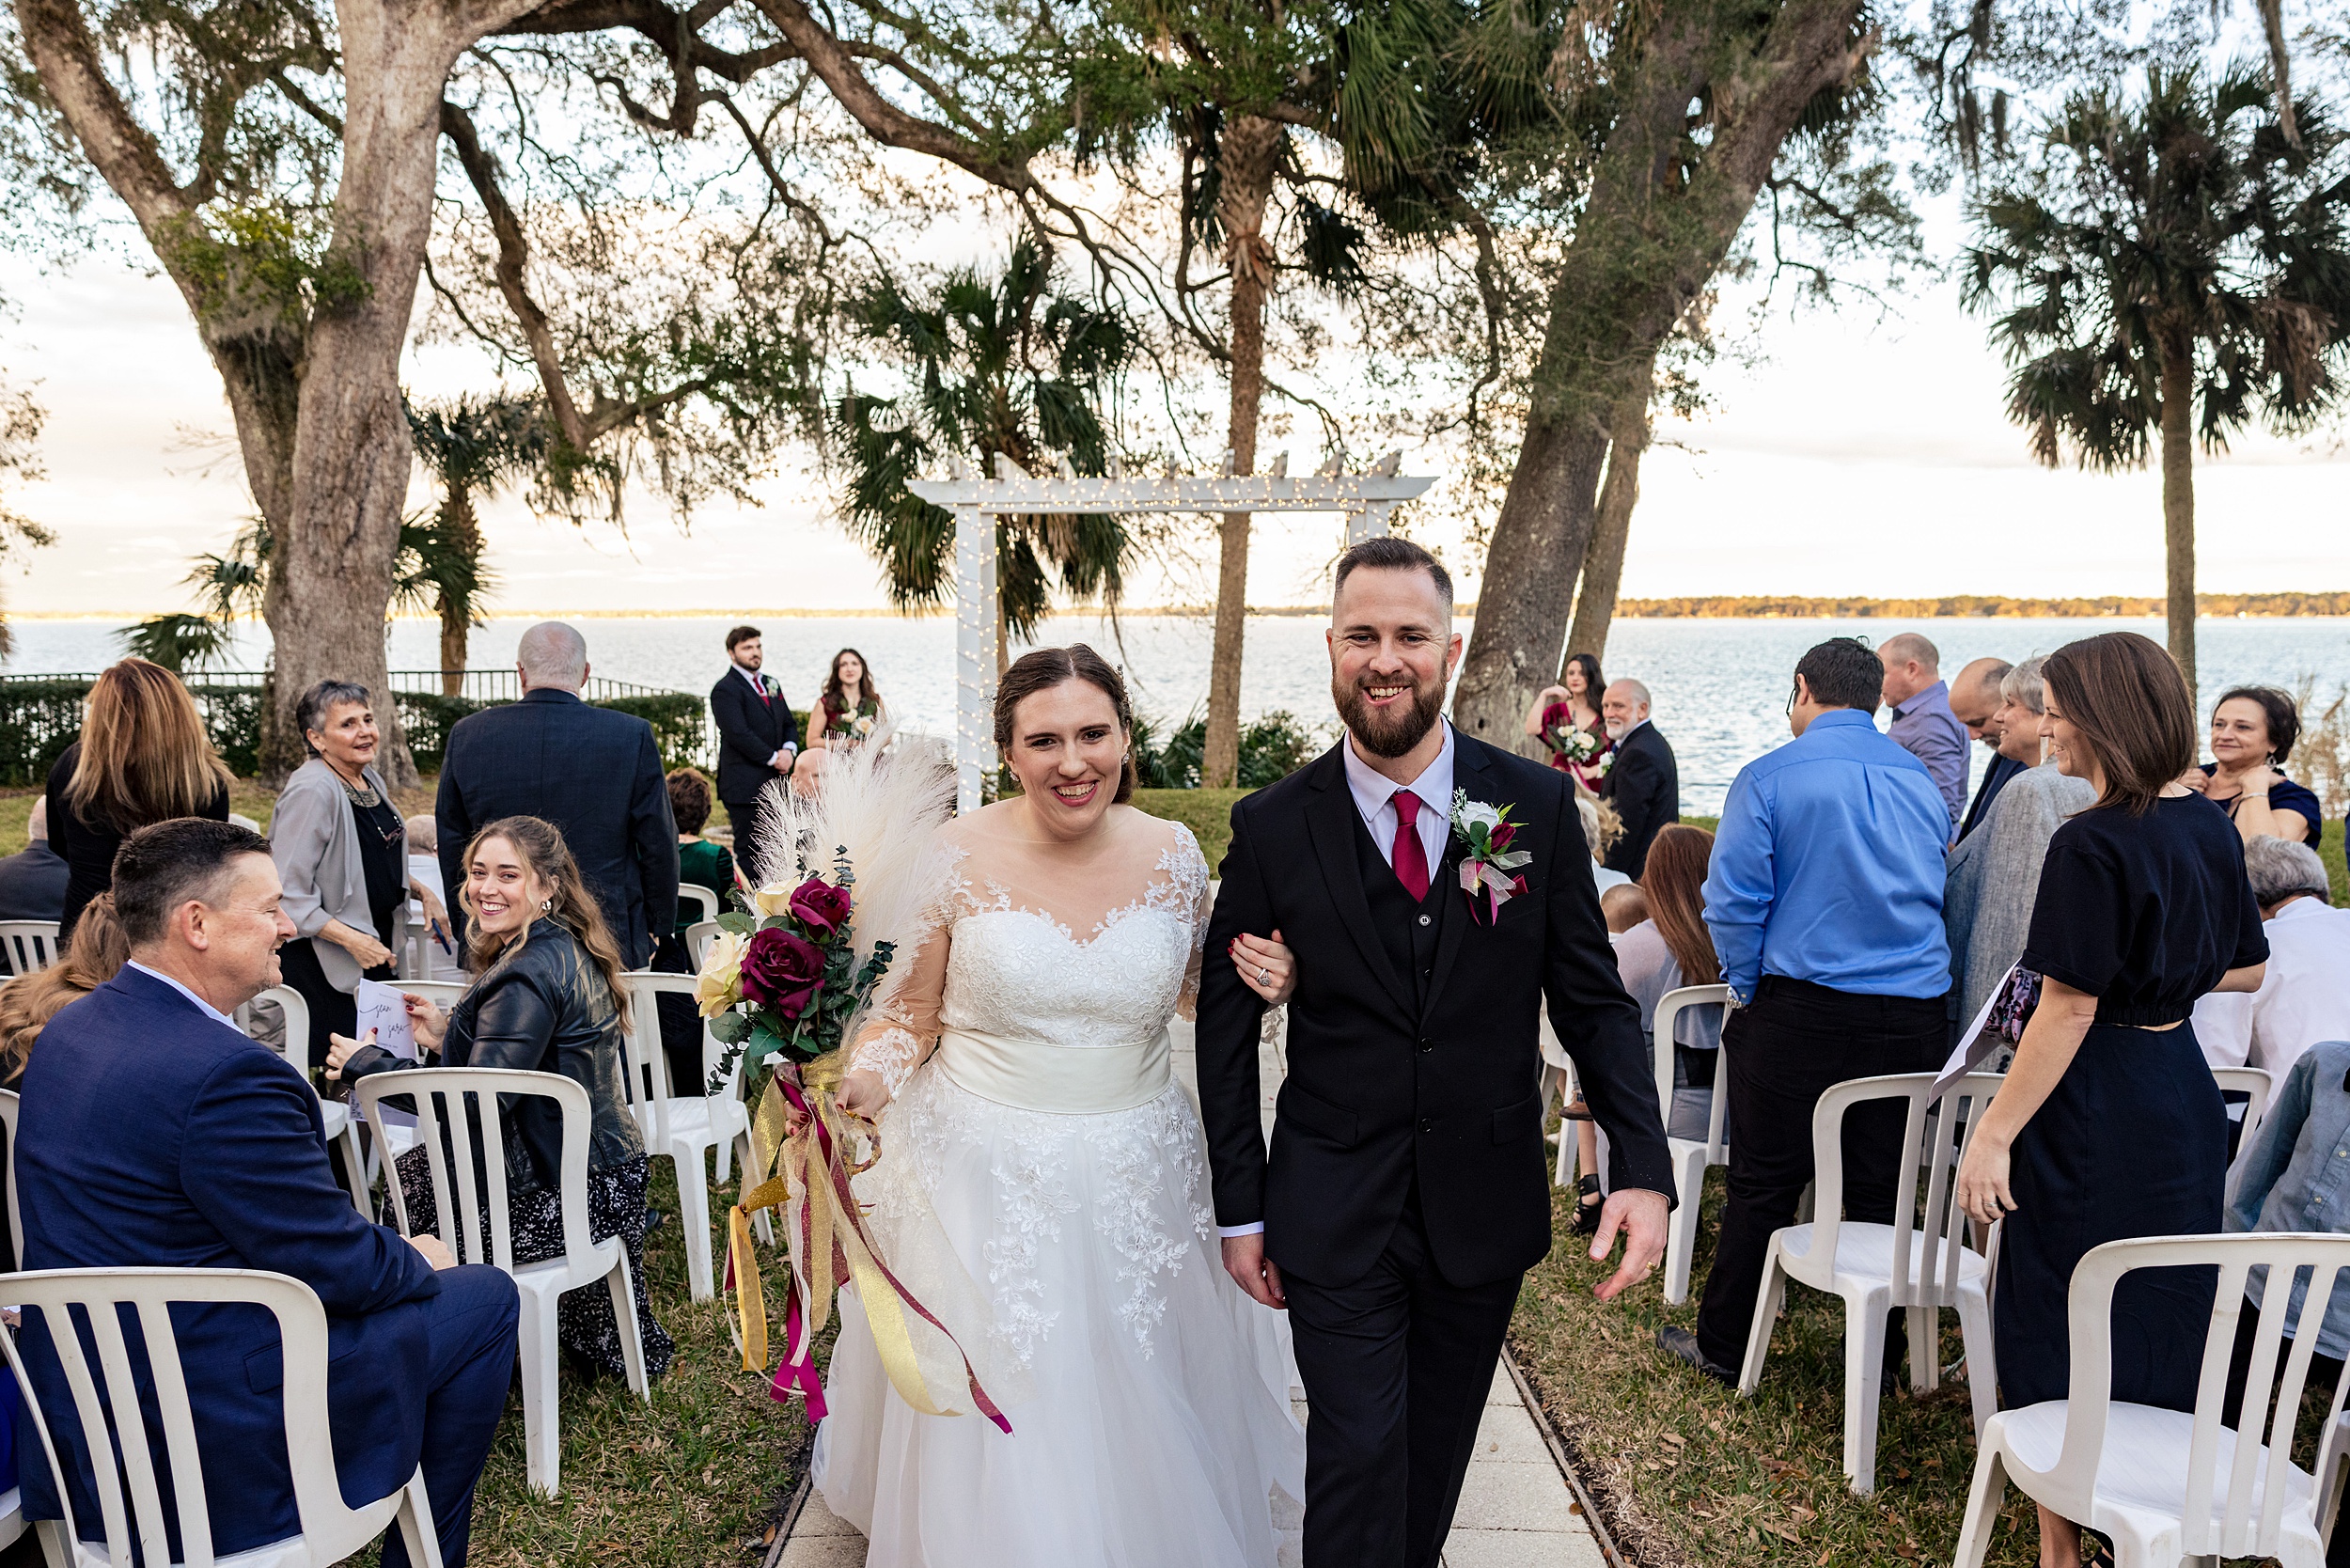 Newlyweds smile while walking up the aisle of their waterfront paradise cove wedding ceremony